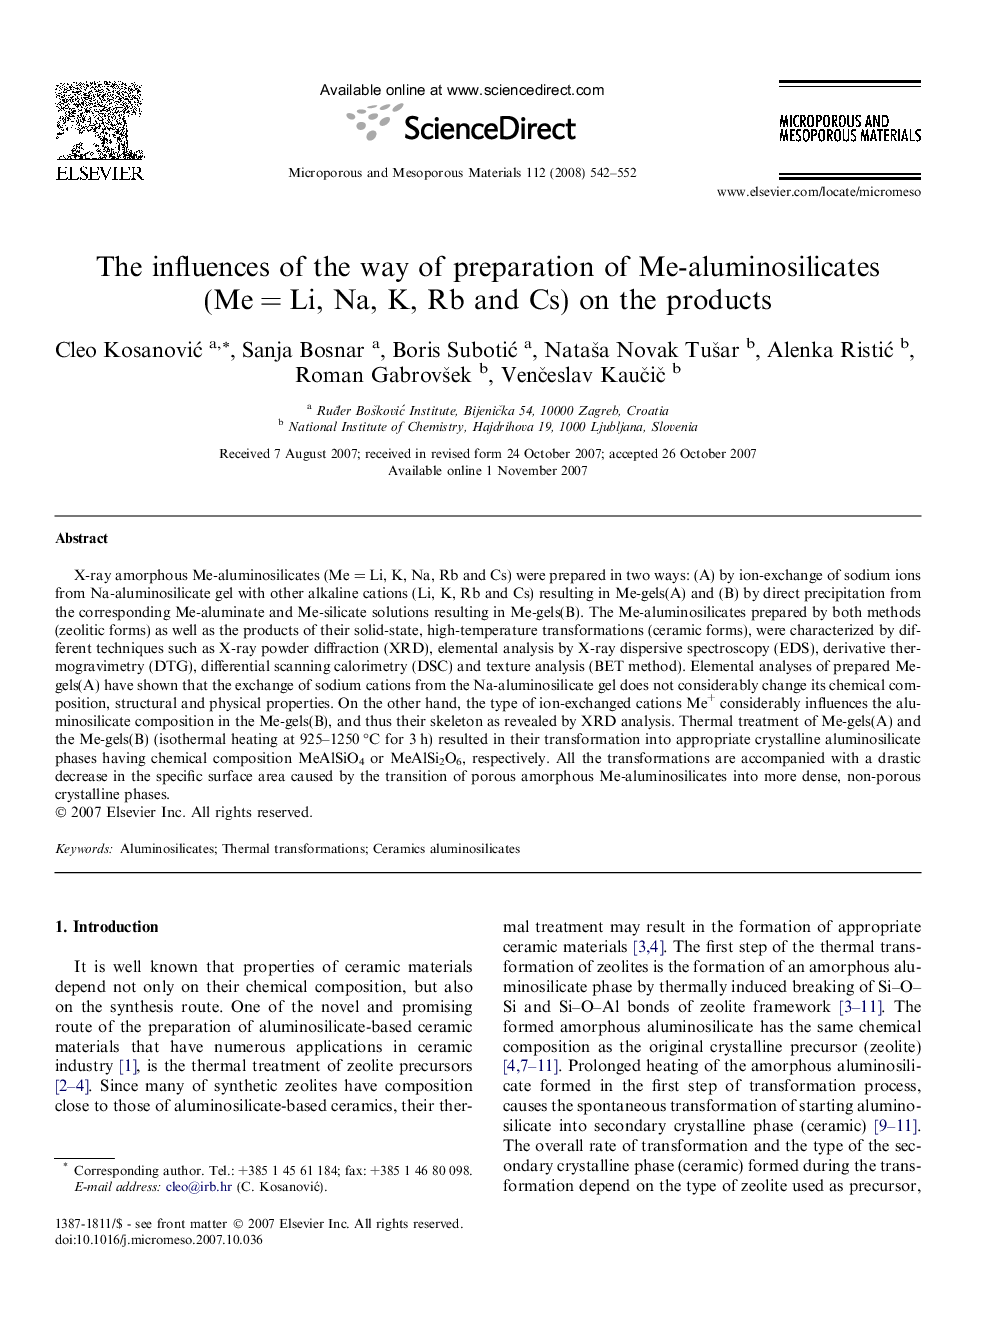 The influences of the way of preparation of Me-aluminosilicates (Me = Li, Na, K, Rb and Cs) on the products